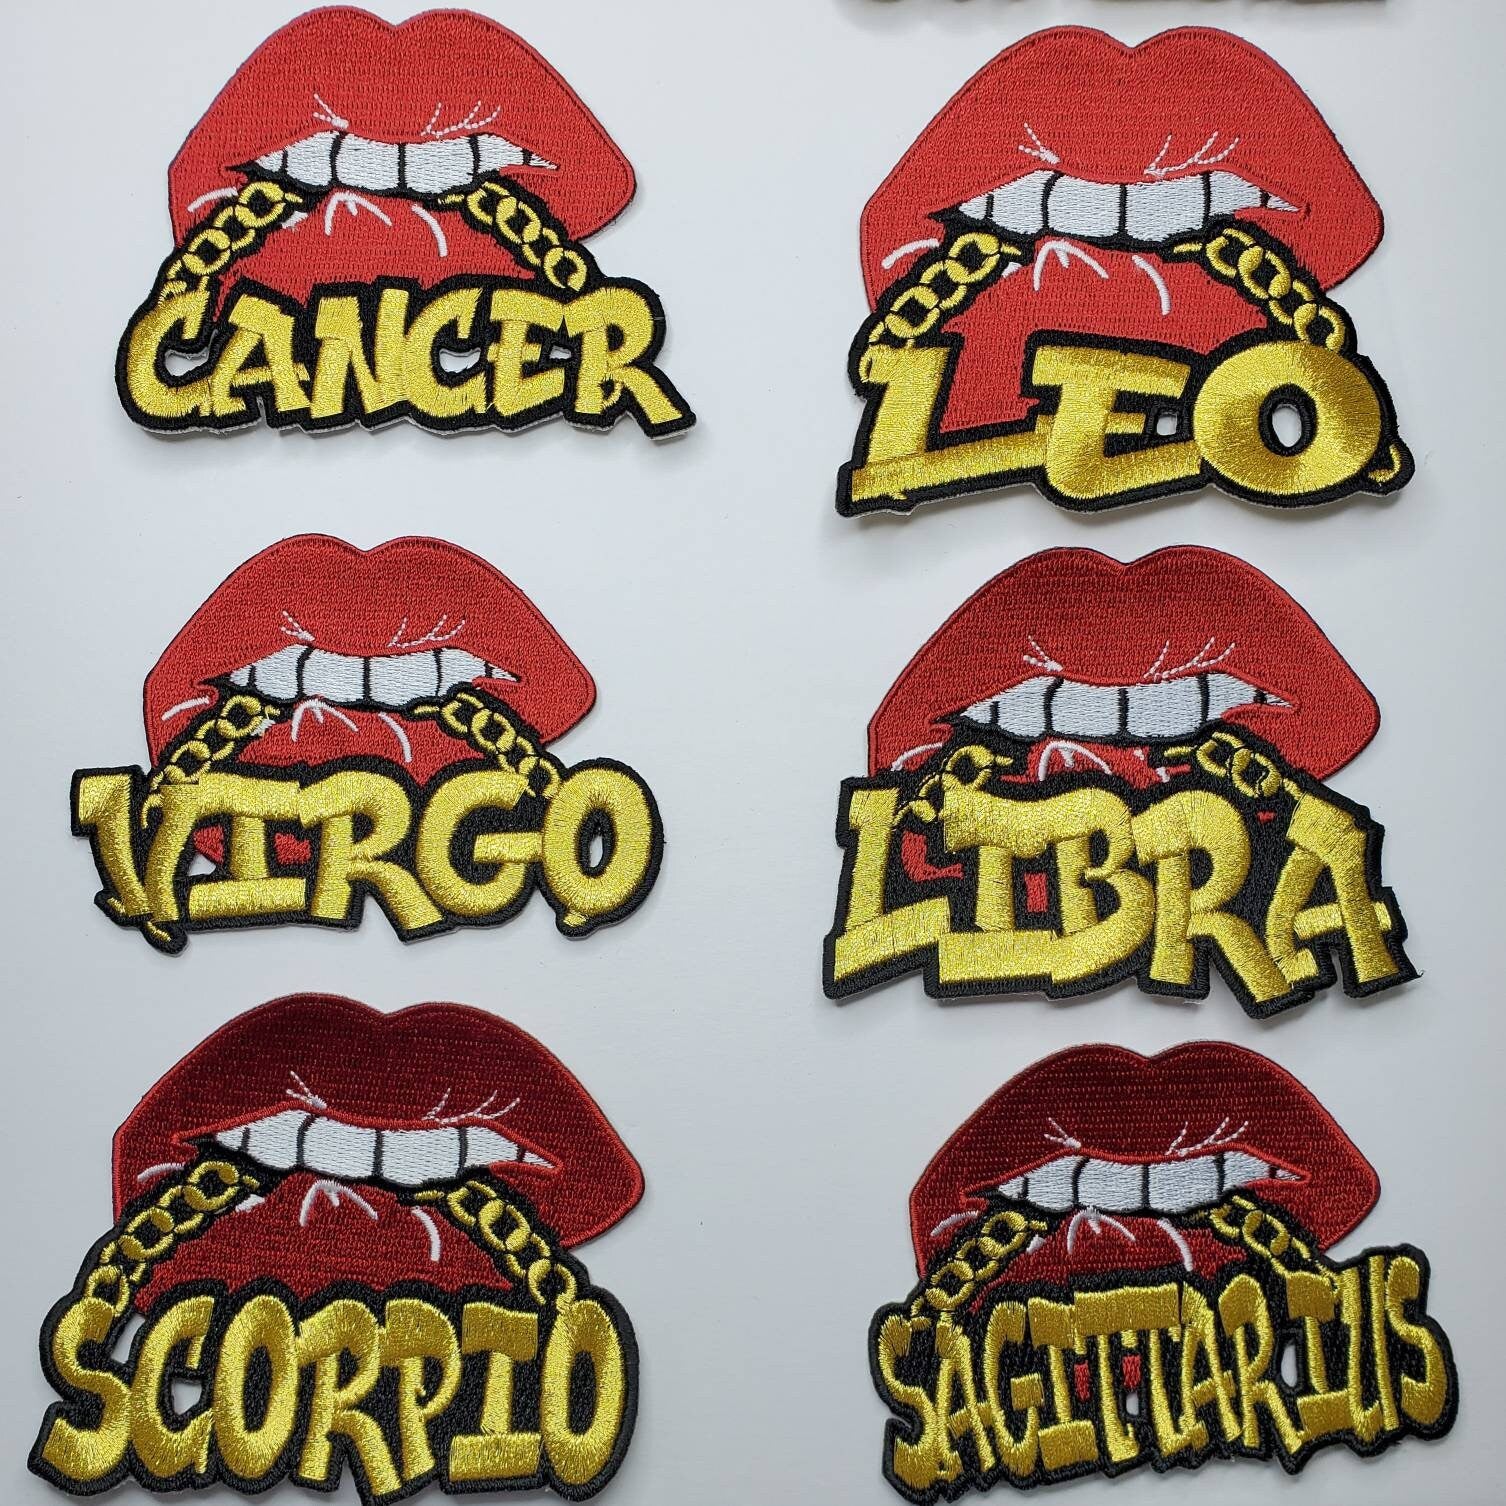 Poppin' Red Lip "Libra" w/Gold Metallic Chain|Iron-On Patch|Astrology Applique|Cool Embroidered Patch|DIY Patch for Denim & Accessories